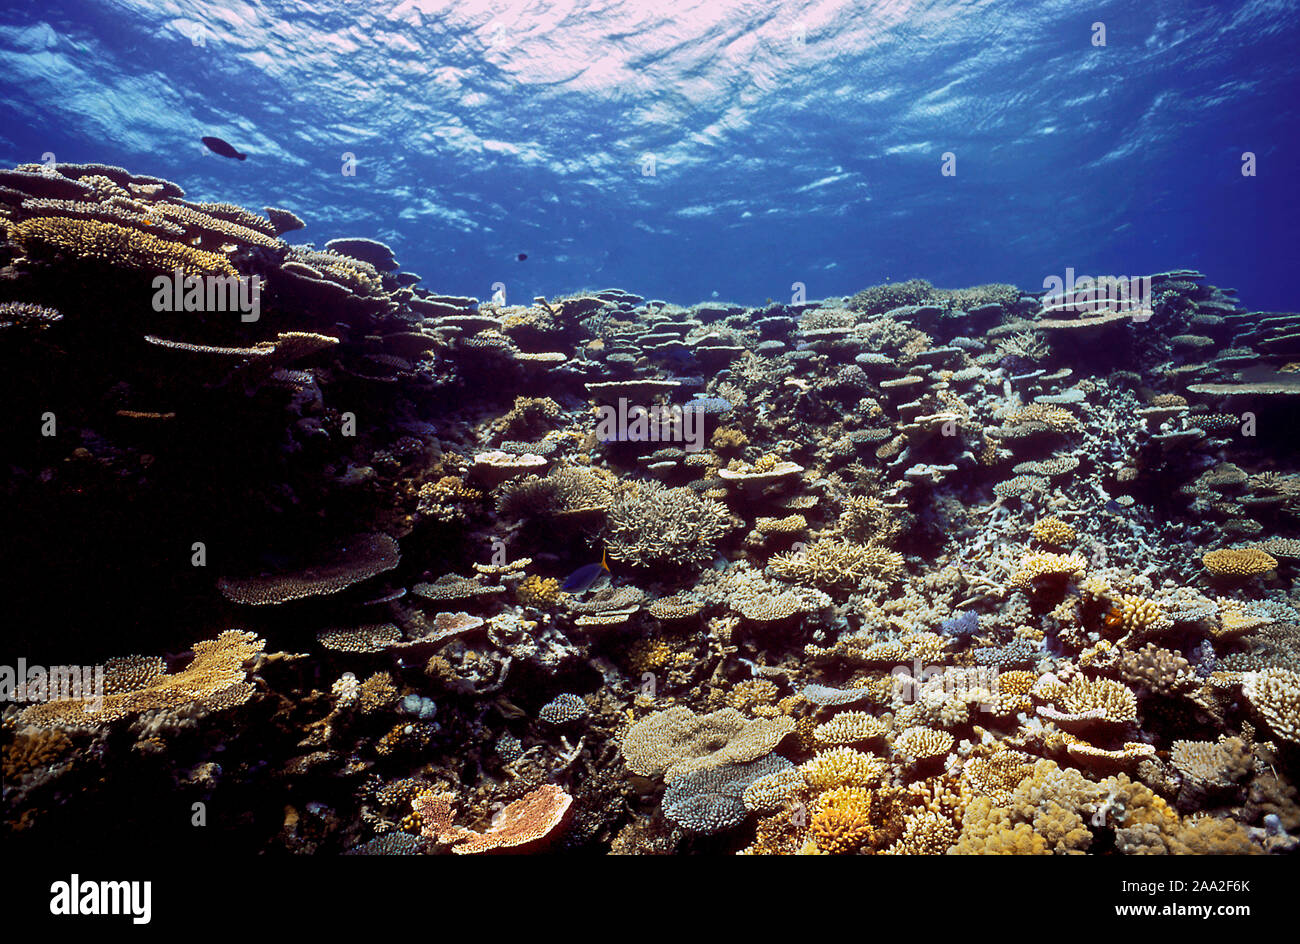 Prolific growth of stony corals on the Great Barrier Reef, Australia Stock Photo